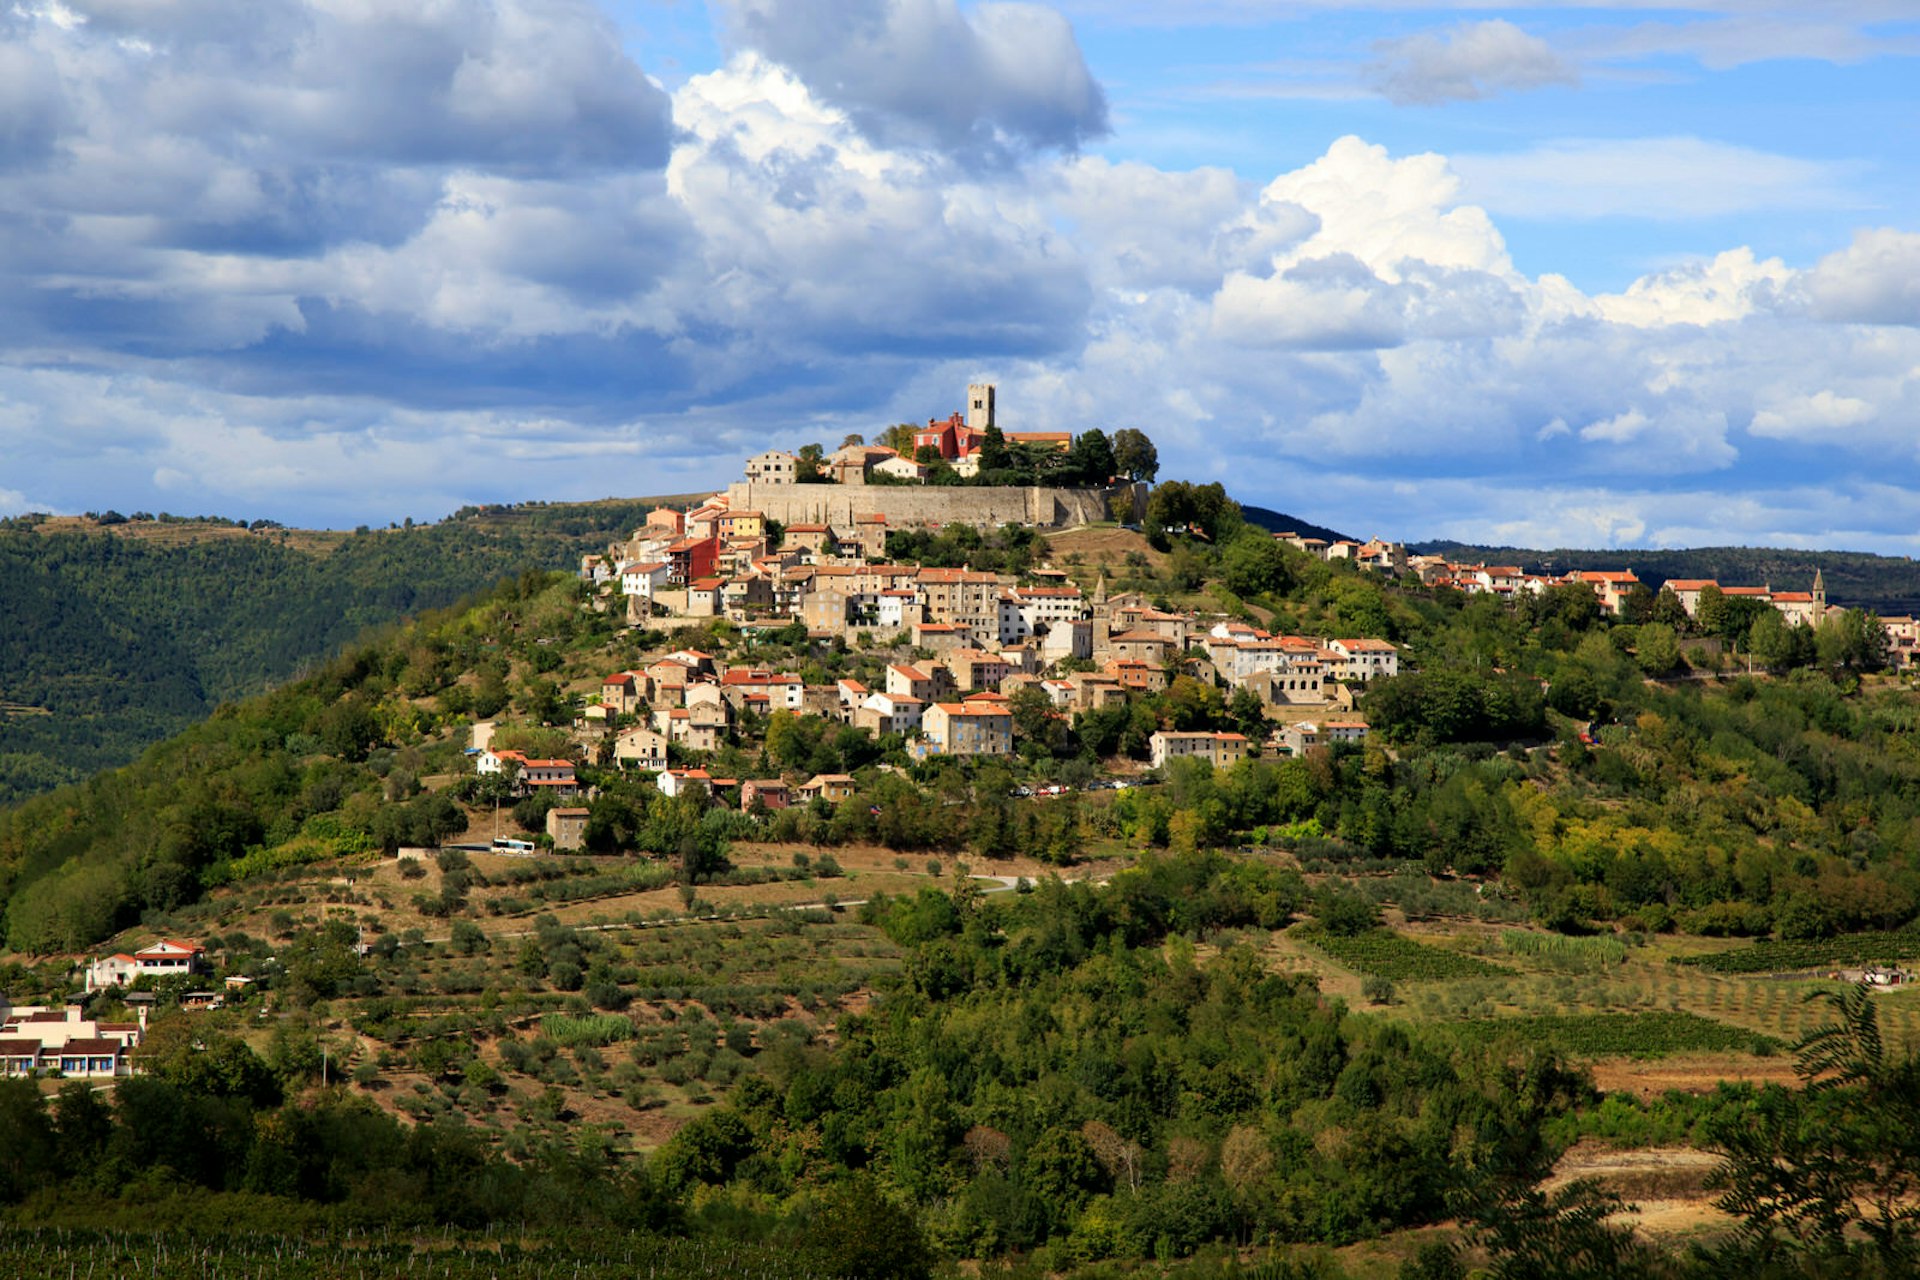 Houses and fortress walls of Motovun perched on a green hill